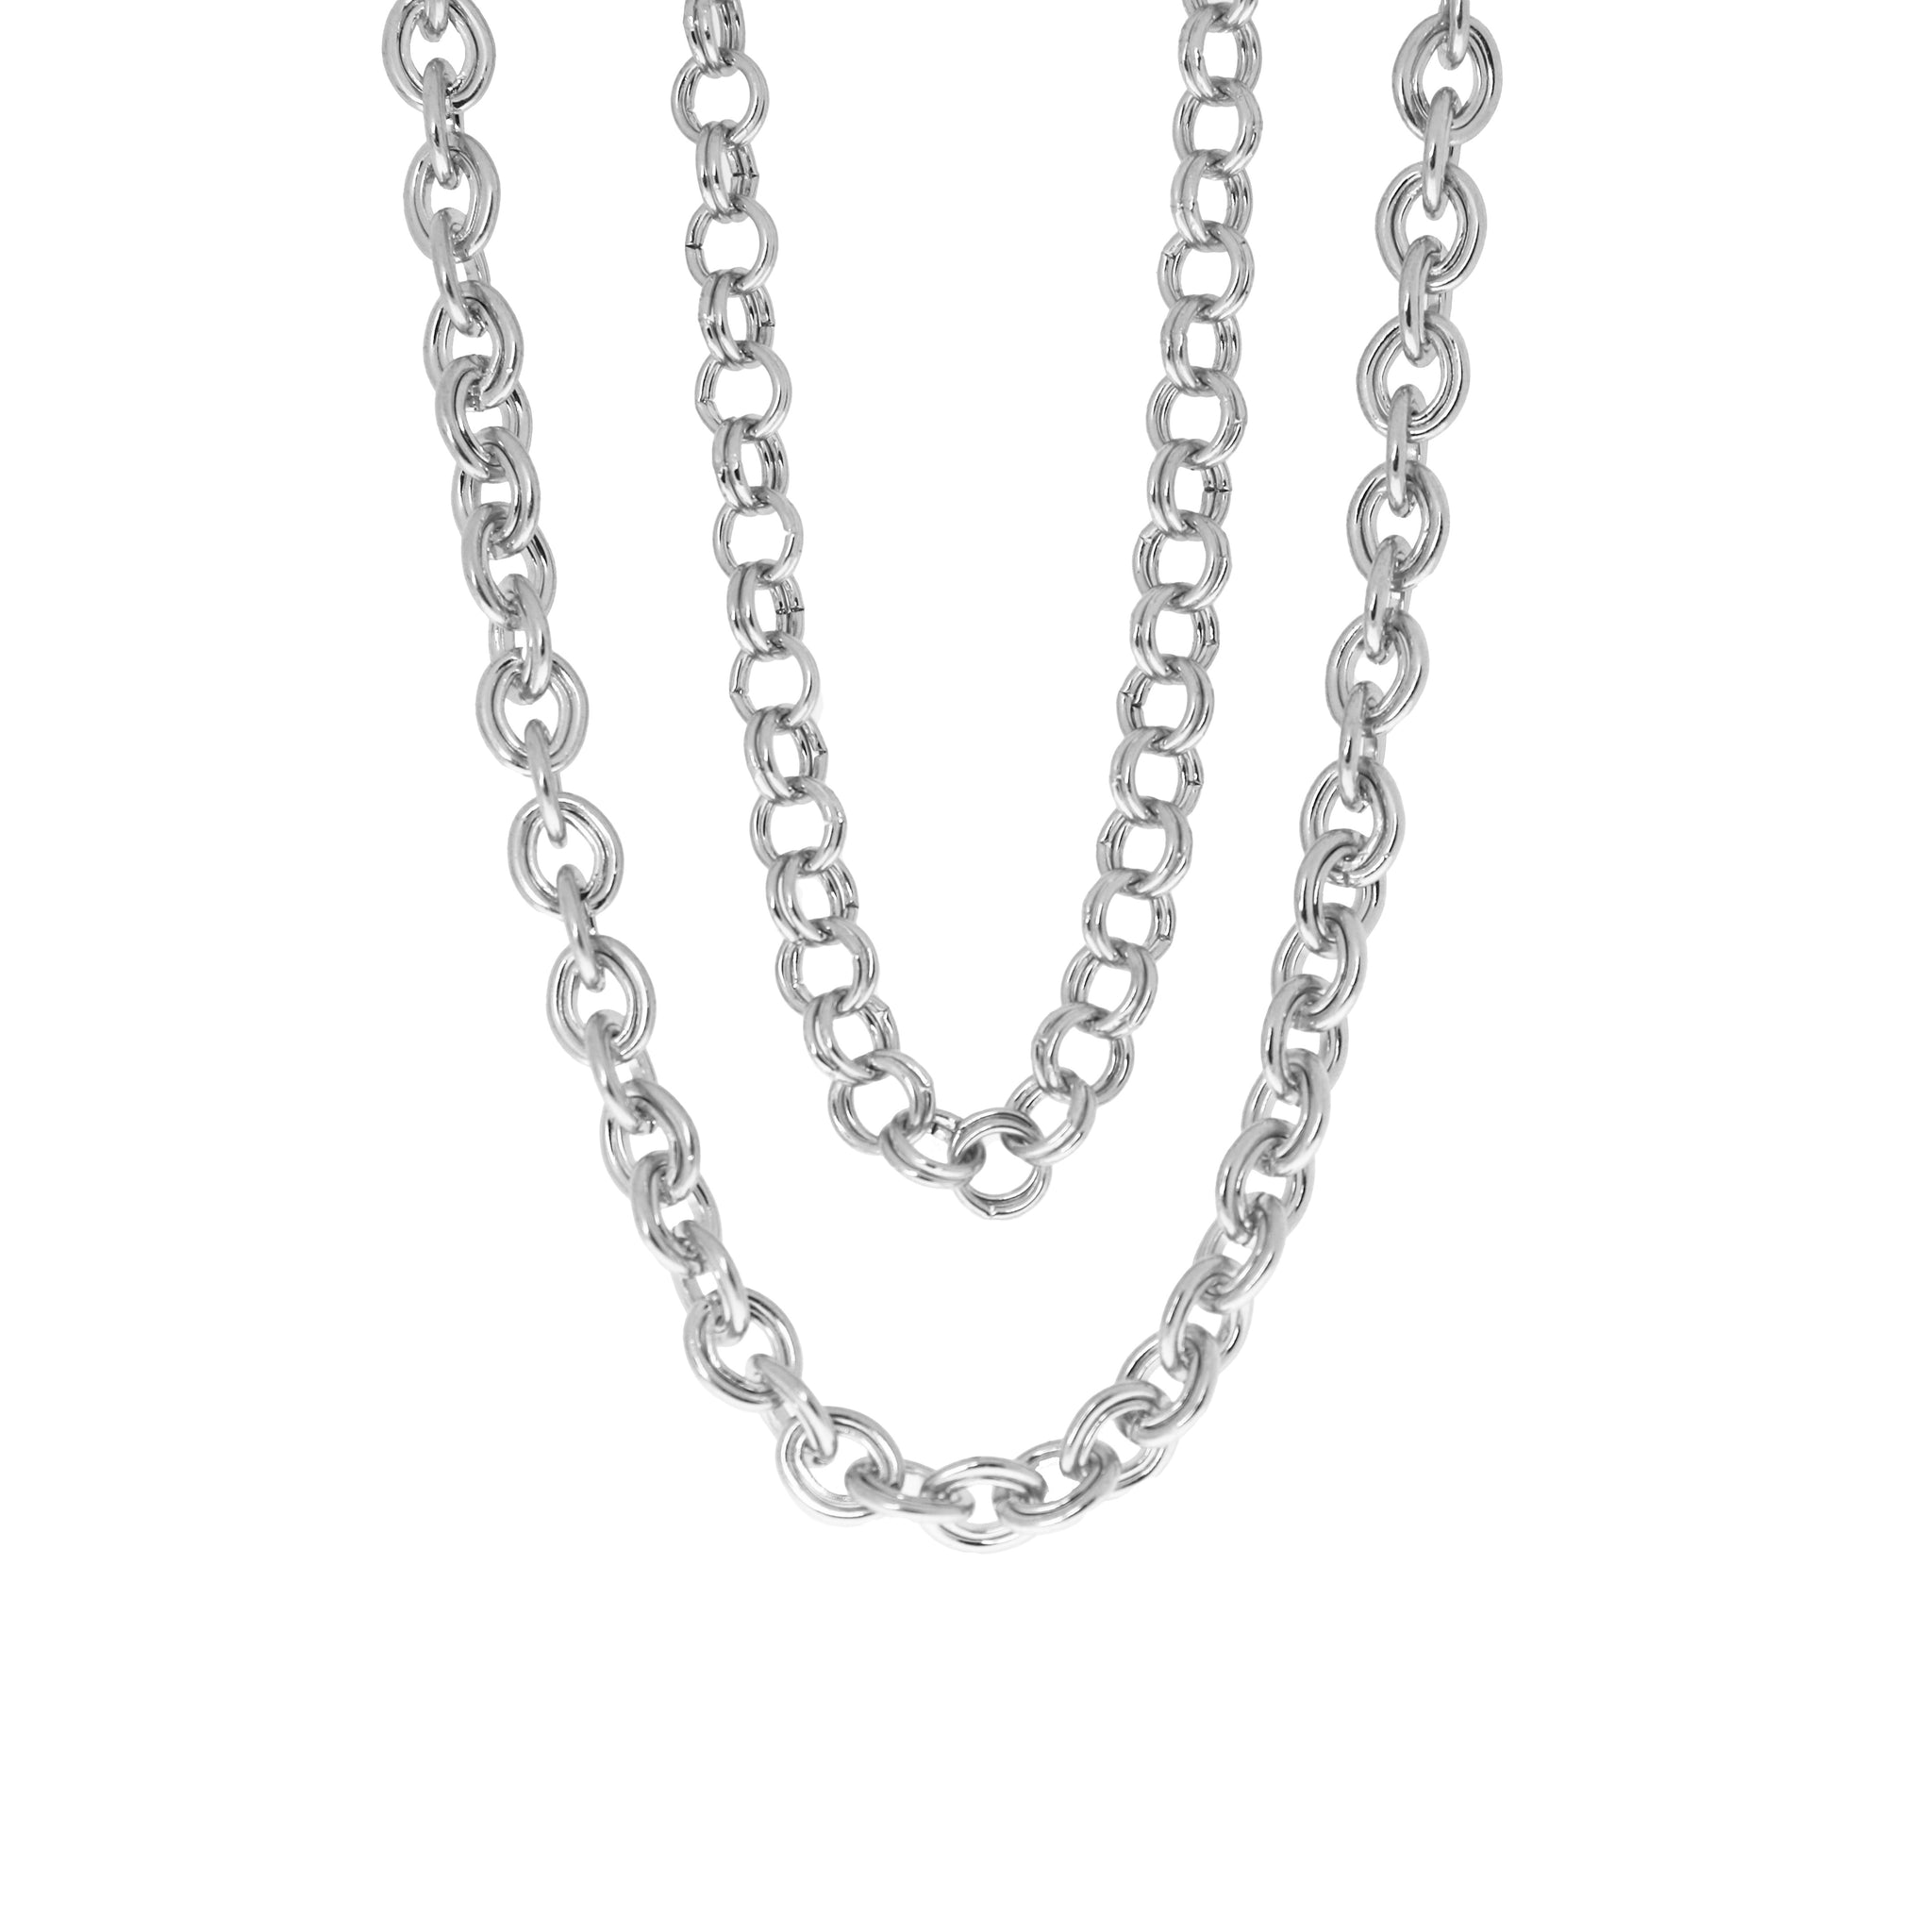 double layered necklace – Marlyn Schiff, LLC